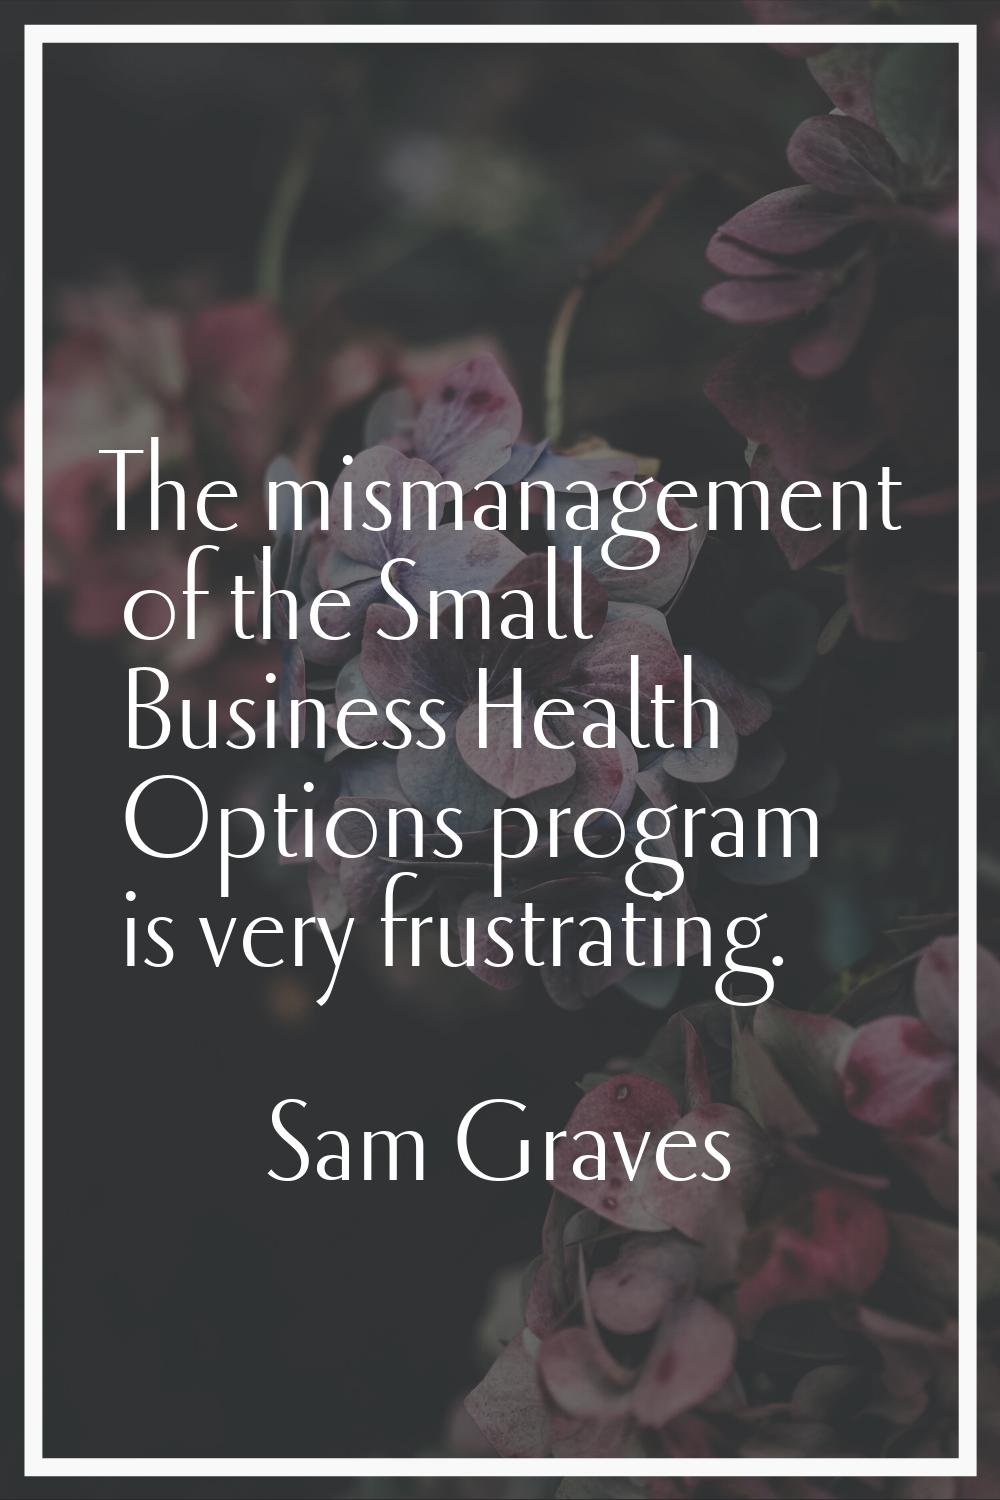 The mismanagement of the Small Business Health Options program is very frustrating.